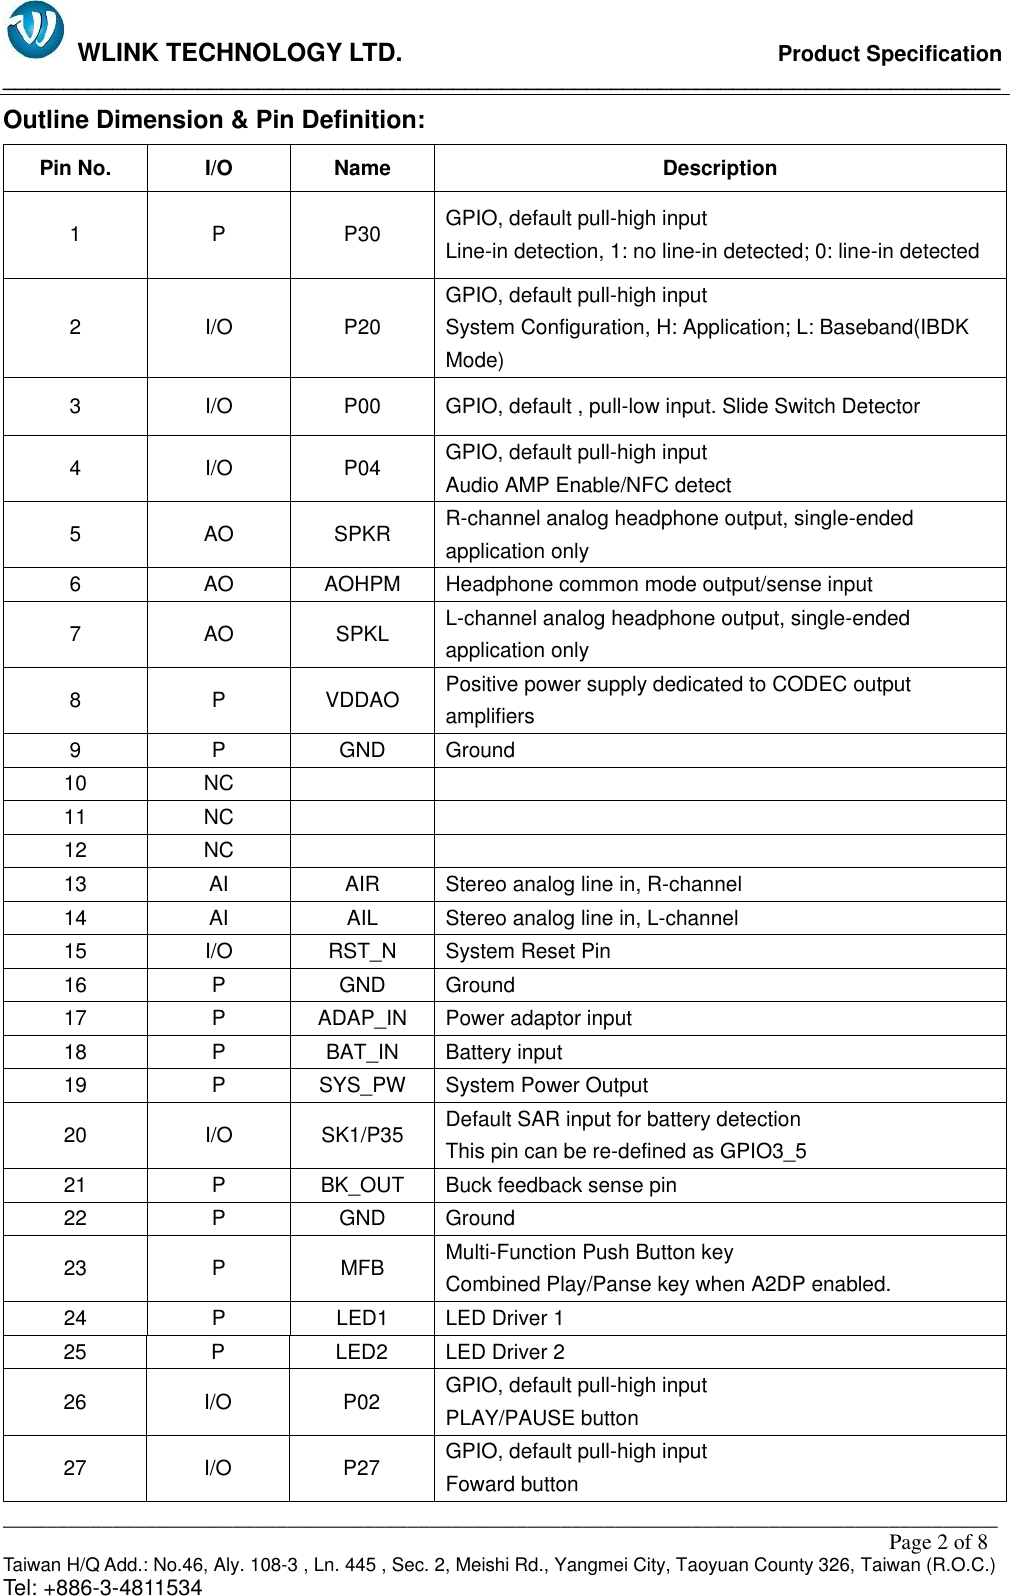   WLINK TECHNOLOGY LTD.                              Product Specification __________________________________________________________________________________ ___________________________________________________________________________________________                                                                                                                                                         Page 2 of 8 Taiwan H/Q Add.: No.46, Aly. 108-3 , Ln. 445 , Sec. 2, Meishi Rd., Yangmei City, Taoyuan County 326, Taiwan (R.O.C.)   Tel: +886-3-4811534 Outline Dimension &amp; Pin Definition: Pin No. I/O Name Description 1 P P30 GPIO, default pull-high input                                                                     Line-in detection, 1: no line-in detected; 0: line-in detected 2 I/O P20 GPIO, default pull-high input                                                                     System Configuration, H: Application; L: Baseband(IBDK Mode) 3 I/O P00 GPIO, default , pull-low input. Slide Switch Detector 4 I/O P04 GPIO, default pull-high input                                                                     Audio AMP Enable/NFC detect 5 AO SPKR R-channel analog headphone output, single-ended application only 6 AO AOHPM Headphone common mode output/sense input 7 AO SPKL L-channel analog headphone output, single-ended application only 8 P VDDAO Positive power supply dedicated to CODEC output amplifiers 9 P GND Ground 10 NC   11 NC   12 NC   13 AI AIR Stereo analog line in, R-channel 14 AI AIL Stereo analog line in, L-channel 15 I/O RST_N System Reset Pin 16 P GND Ground 17 P ADAP_IN Power adaptor input 18 P BAT_IN Battery input 19 P SYS_PW System Power Output 20 I/O SK1/P35 Default SAR input for battery detection This pin can be re-defined as GPIO3_5 21 P BK_OUT Buck feedback sense pin 22 P GND Ground 23 P MFB Multi-Function Push Button key                                             Combined Play/Panse key when A2DP enabled. 24 P LED1 LED Driver 1 25 P LED2 LED Driver 2 26 I/O P02 GPIO, default pull-high input                                                 PLAY/PAUSE button 27 I/O P27 GPIO, default pull-high input                                                 Foward button 